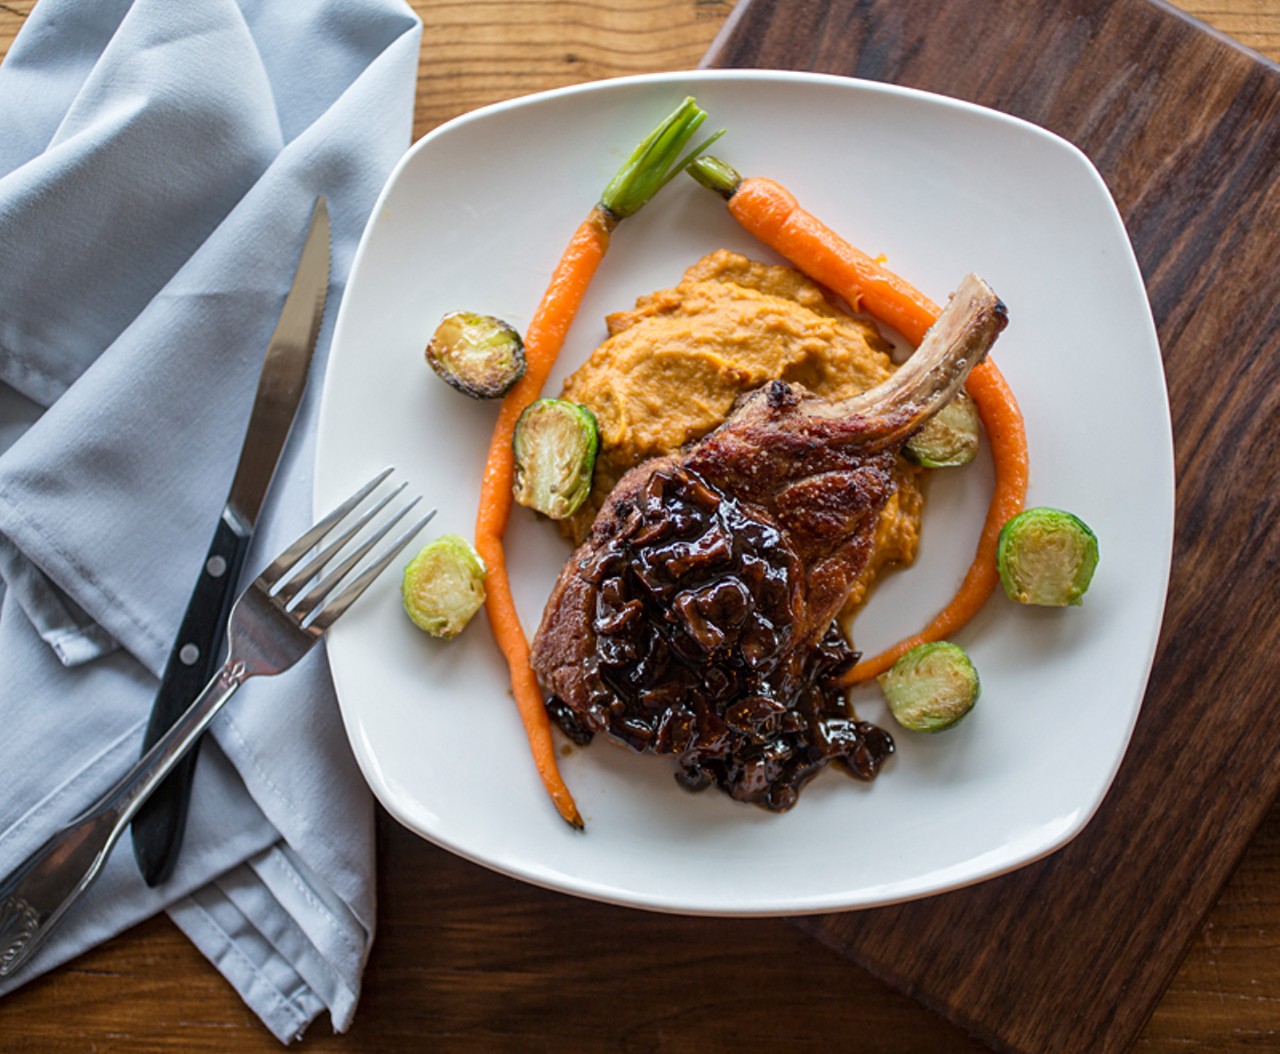 Deppe Farms' heritage-breed Duroc pork chop is served with Ozark Forest wild mushroom madeira sauce, Double Star Farms sweet potato and cauliflower mash, roasted baby carrots and Brussels sprouts.